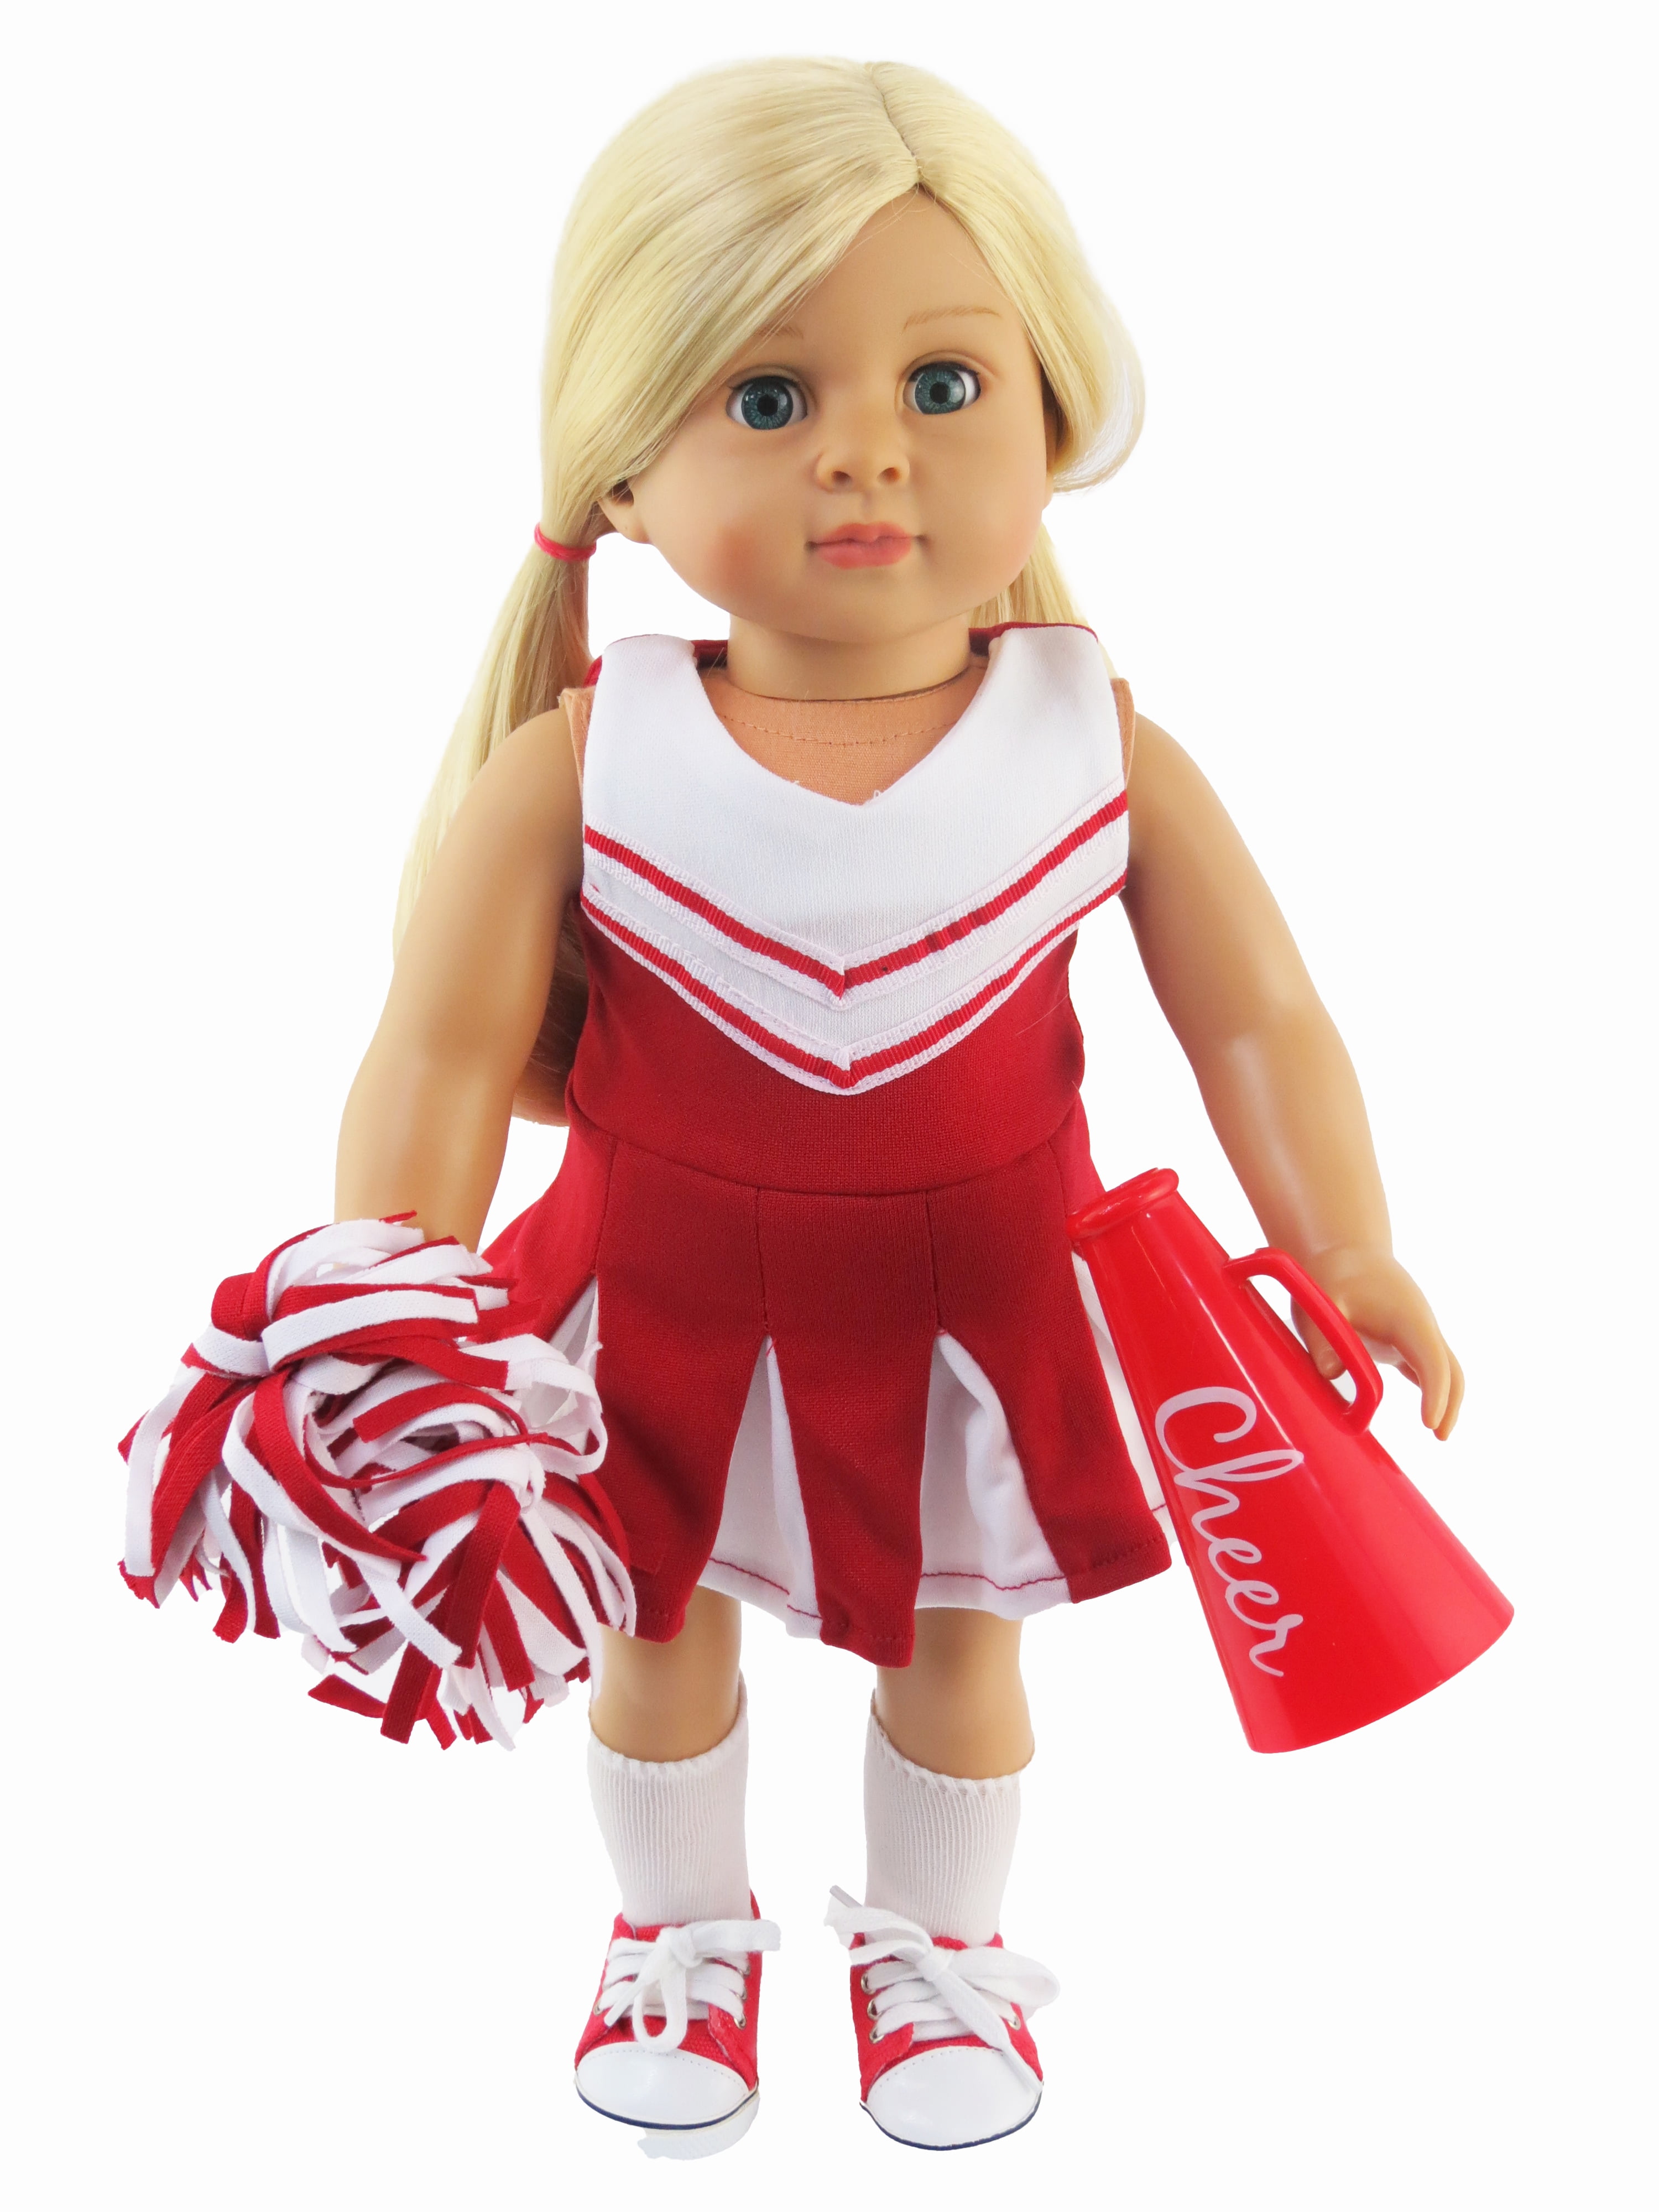 Personalized American Cheerleader Cheer Outfit Uniform 18" Girl Doll Clothes 